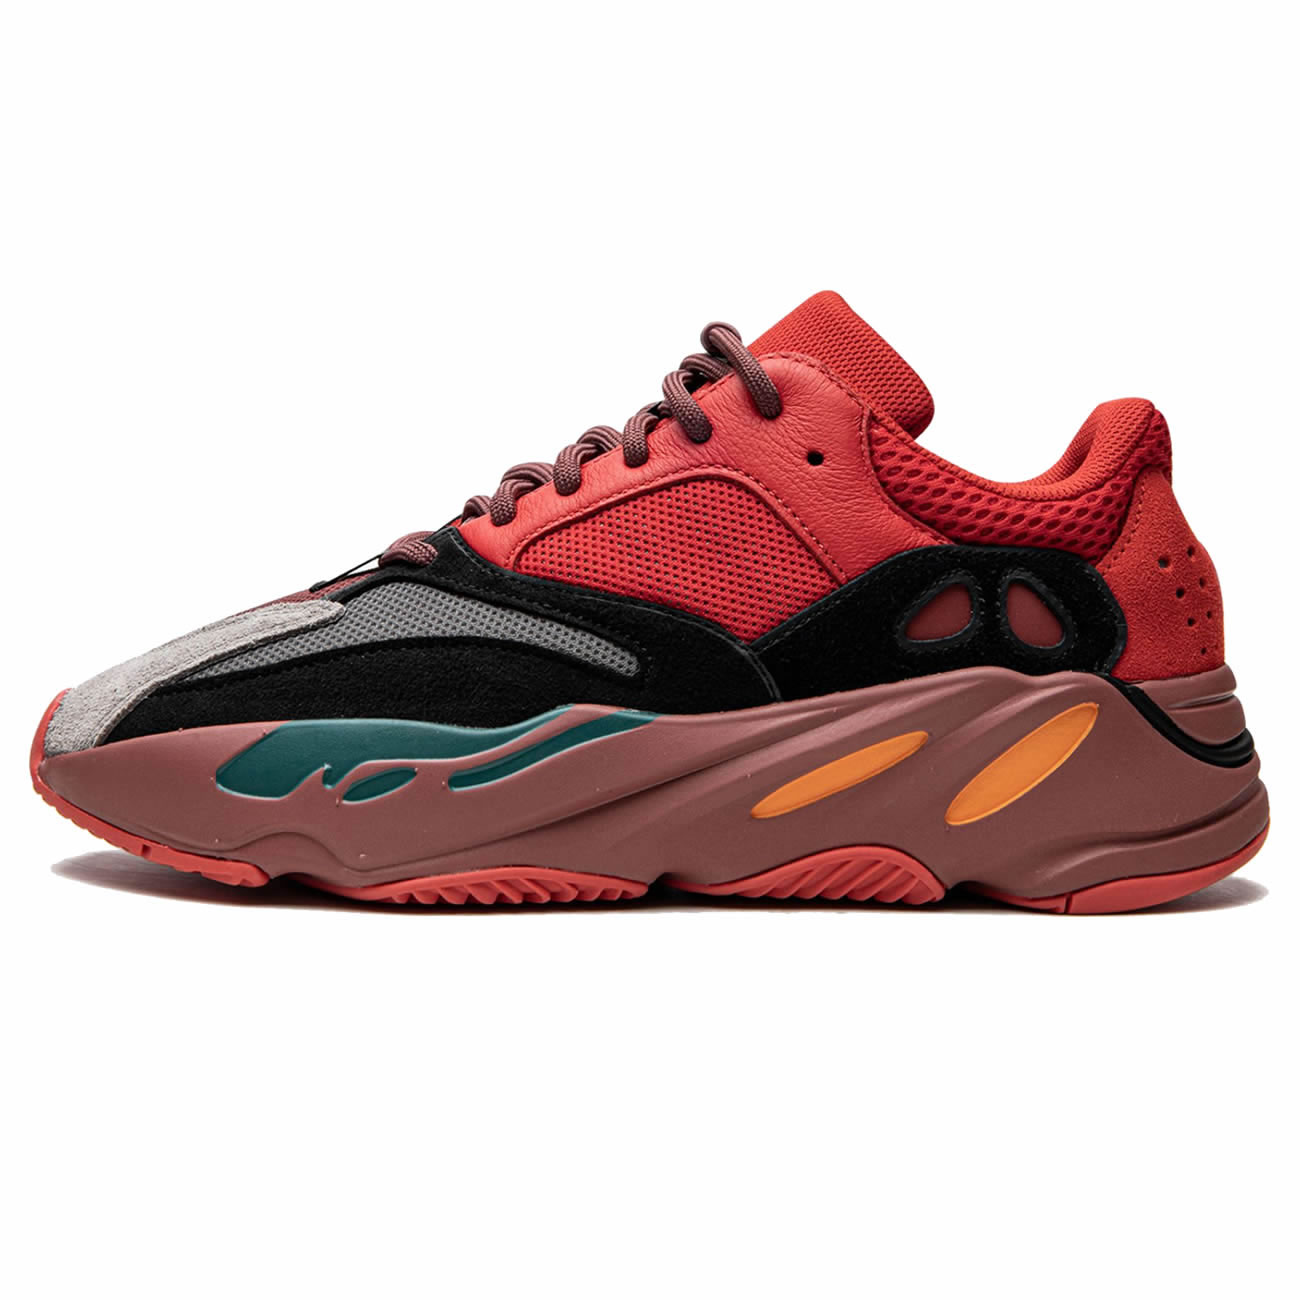 Adidas Yeezy Boost 700 Hi Res Red Hq6979 (1) - newkick.org